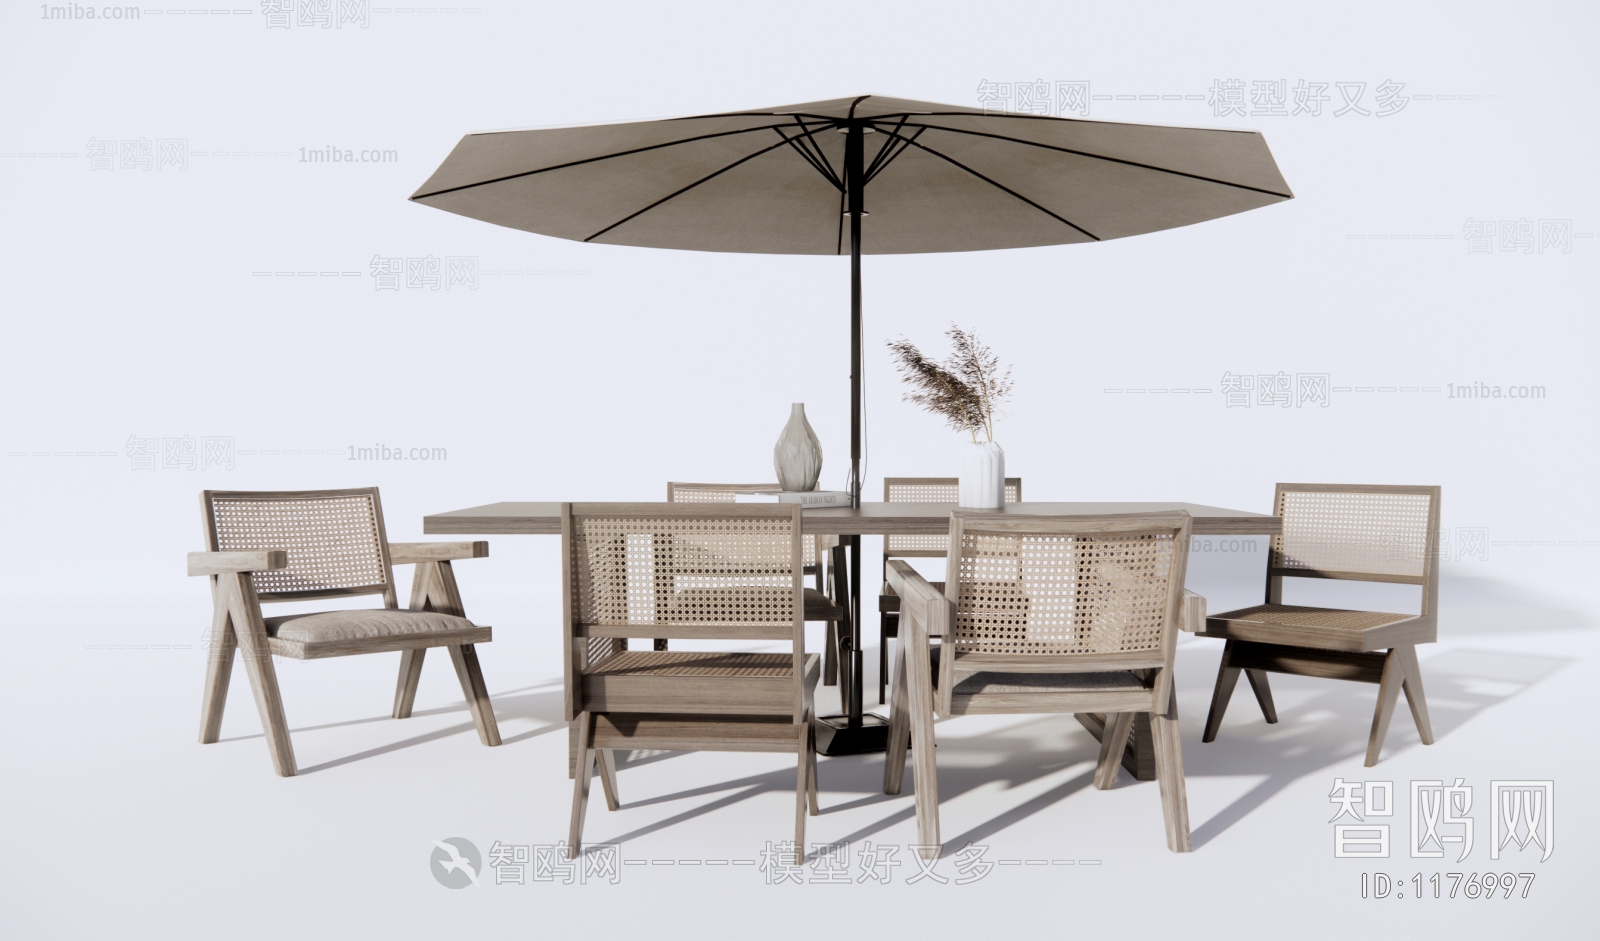 Wabi-sabi Style Outdoor Tables And Chairs